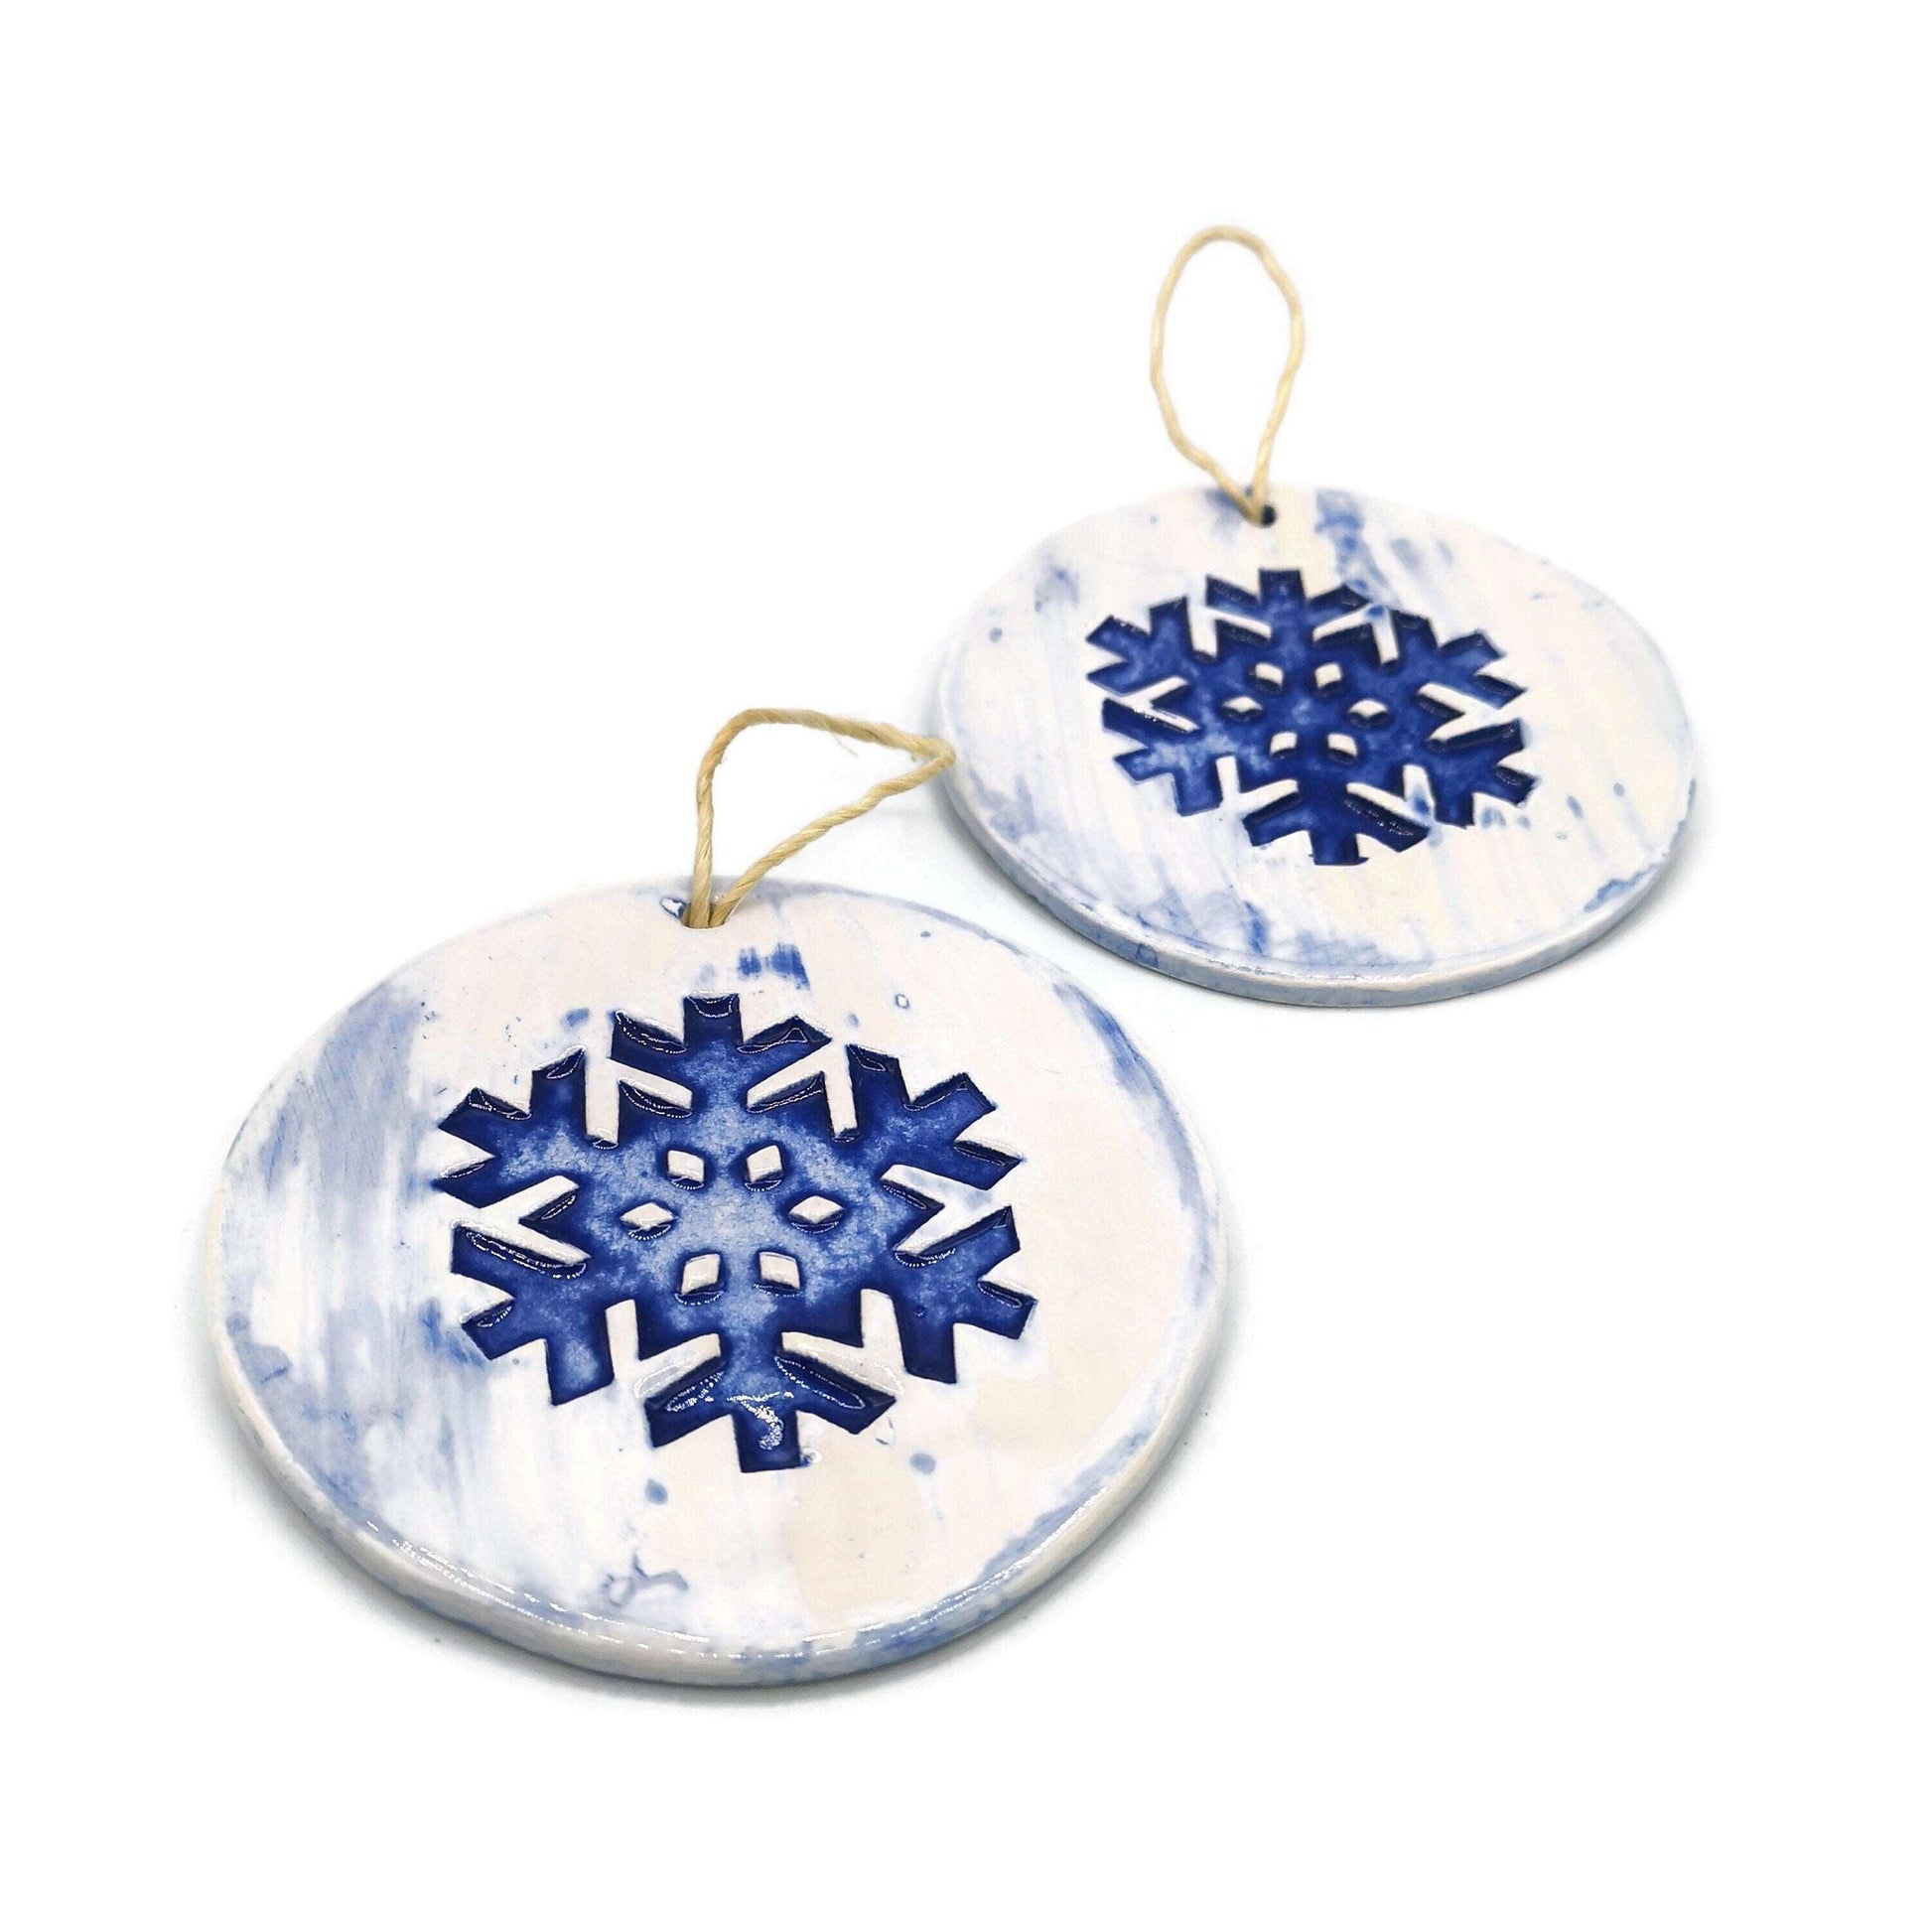 1Pc CERAMIC SNOWFLAKE ORNAMENTS, Clay Wall Hanging, Home Decor Gifts Christmas, Blue Handmade Holidays Home Decor, Winter Accents